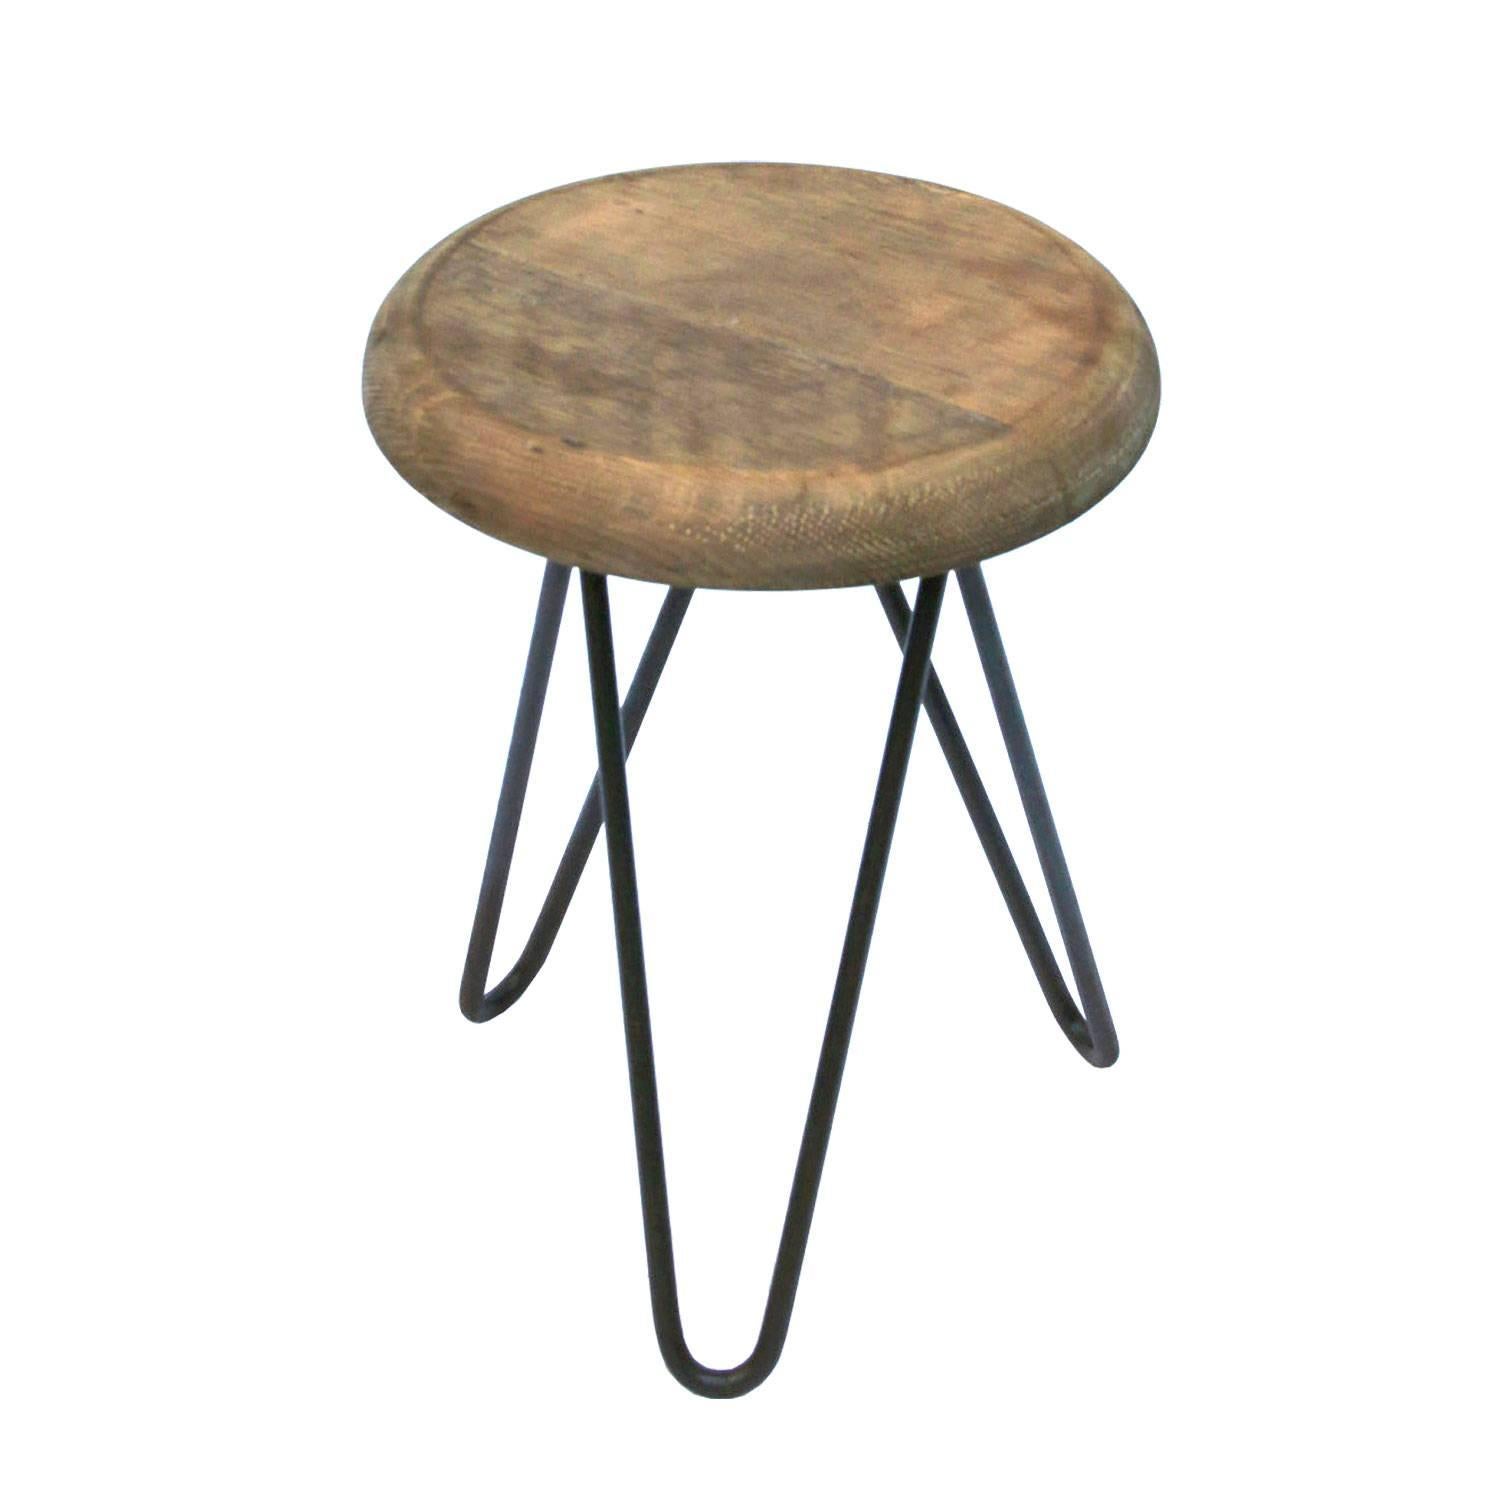 Classic design, beautiful in simplicity, clear lines and timeless shape. 
Original military stools from East-European airbase.

Priced per individual item.